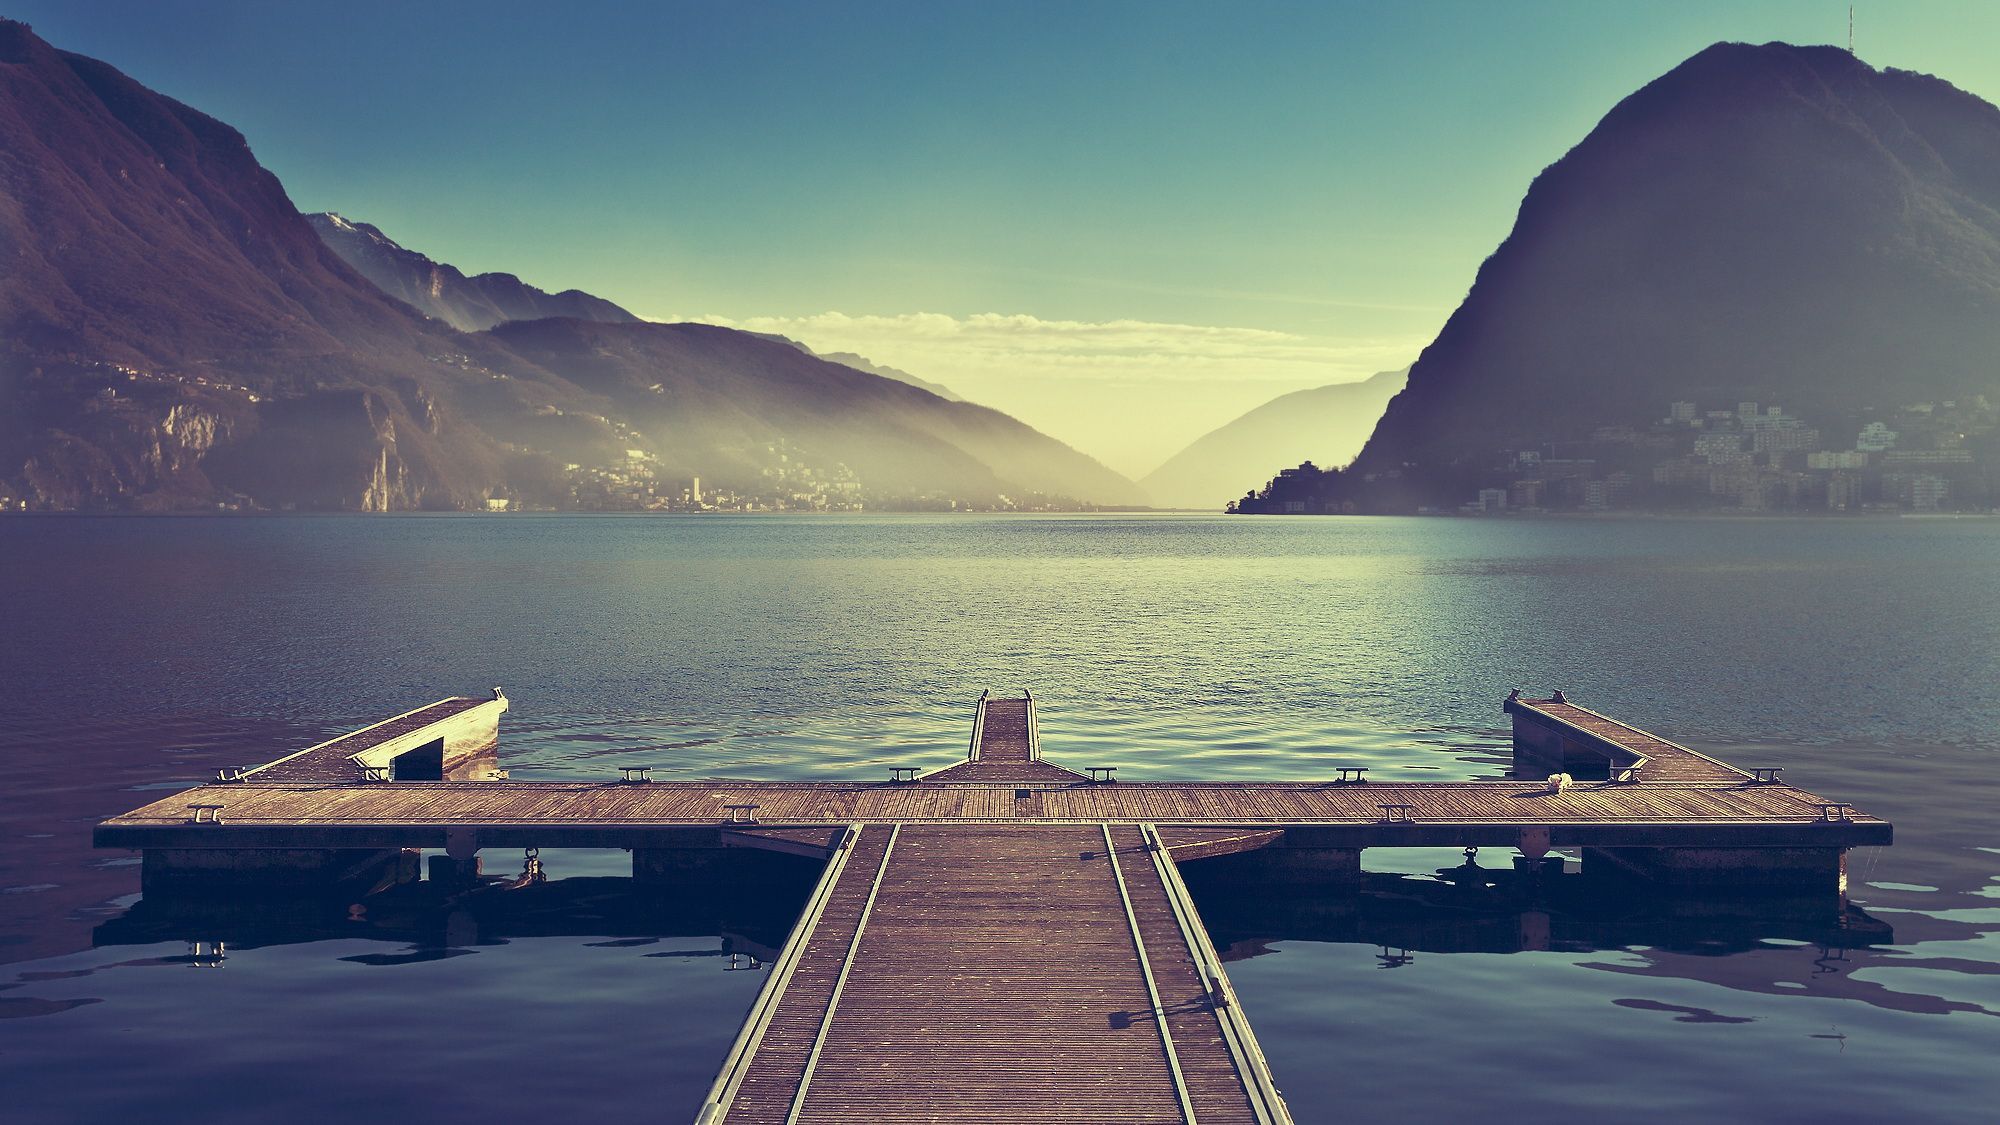 Lake of Lugano, Canton of Ticino, Switzerland On the right is San